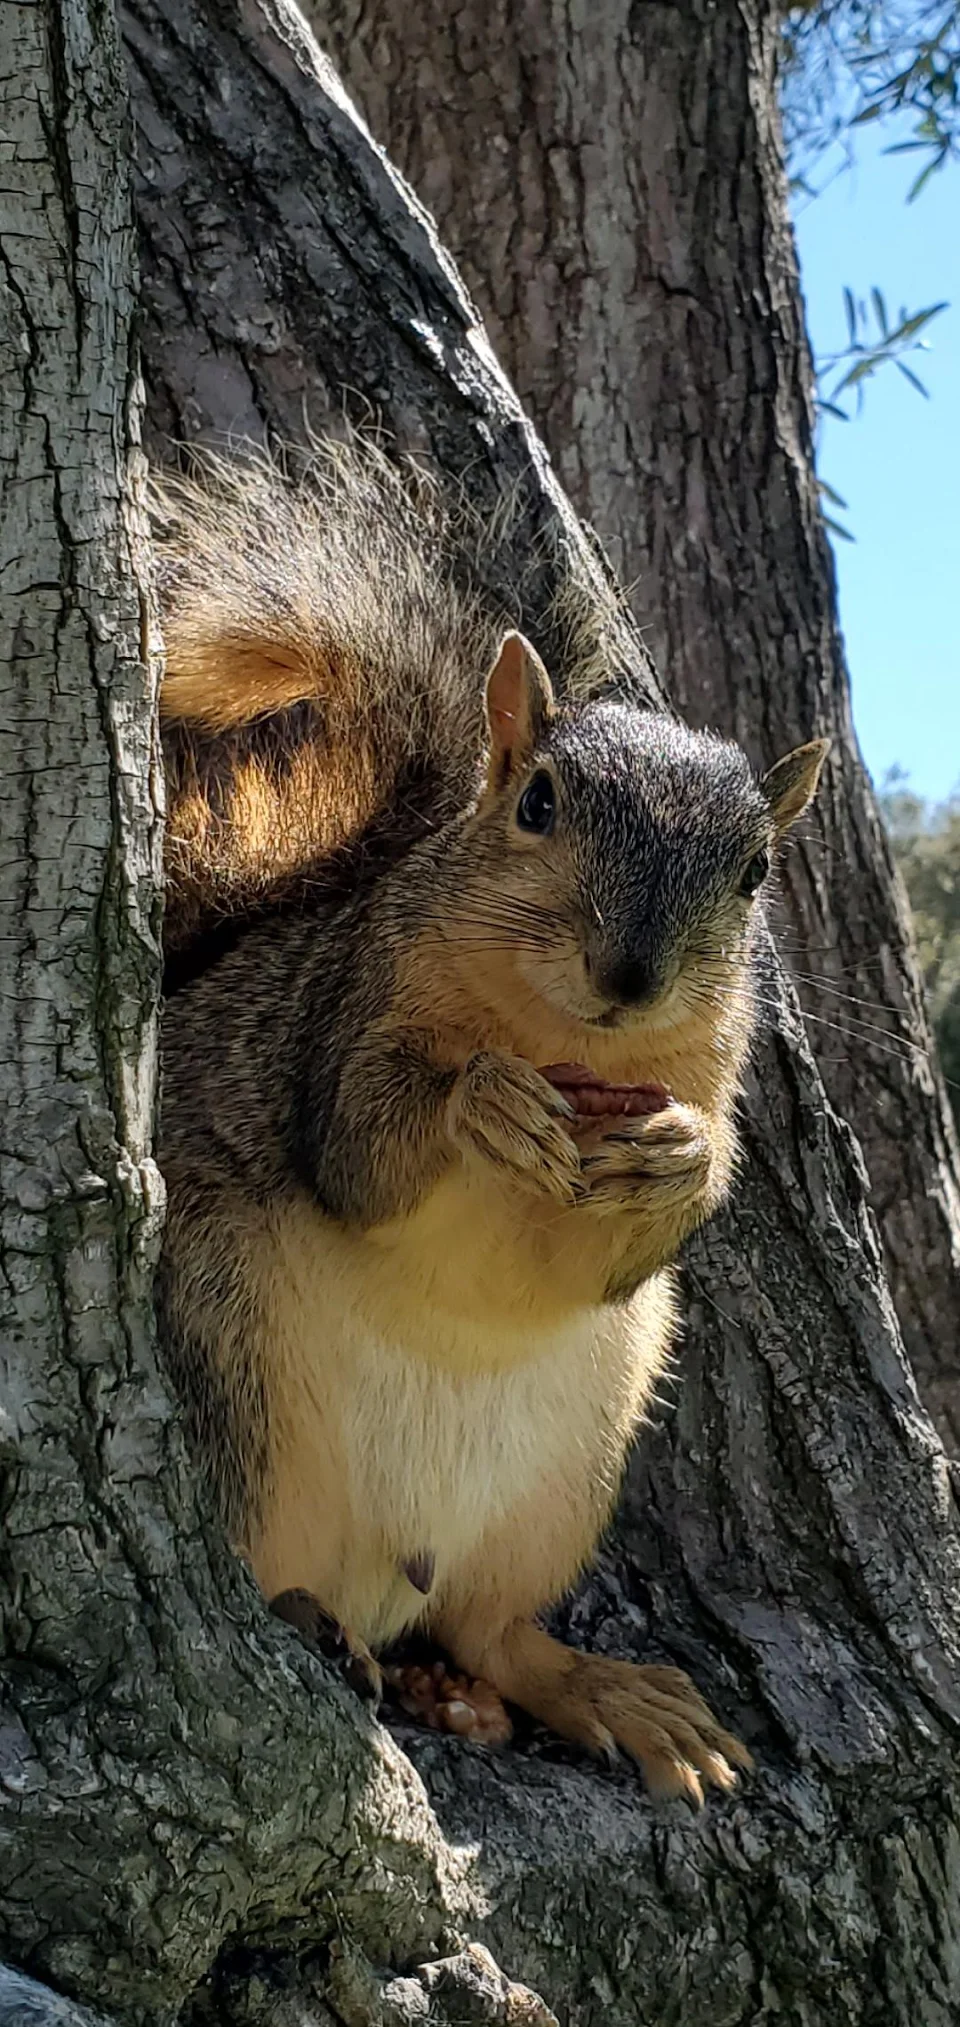 Don't touch my nut!